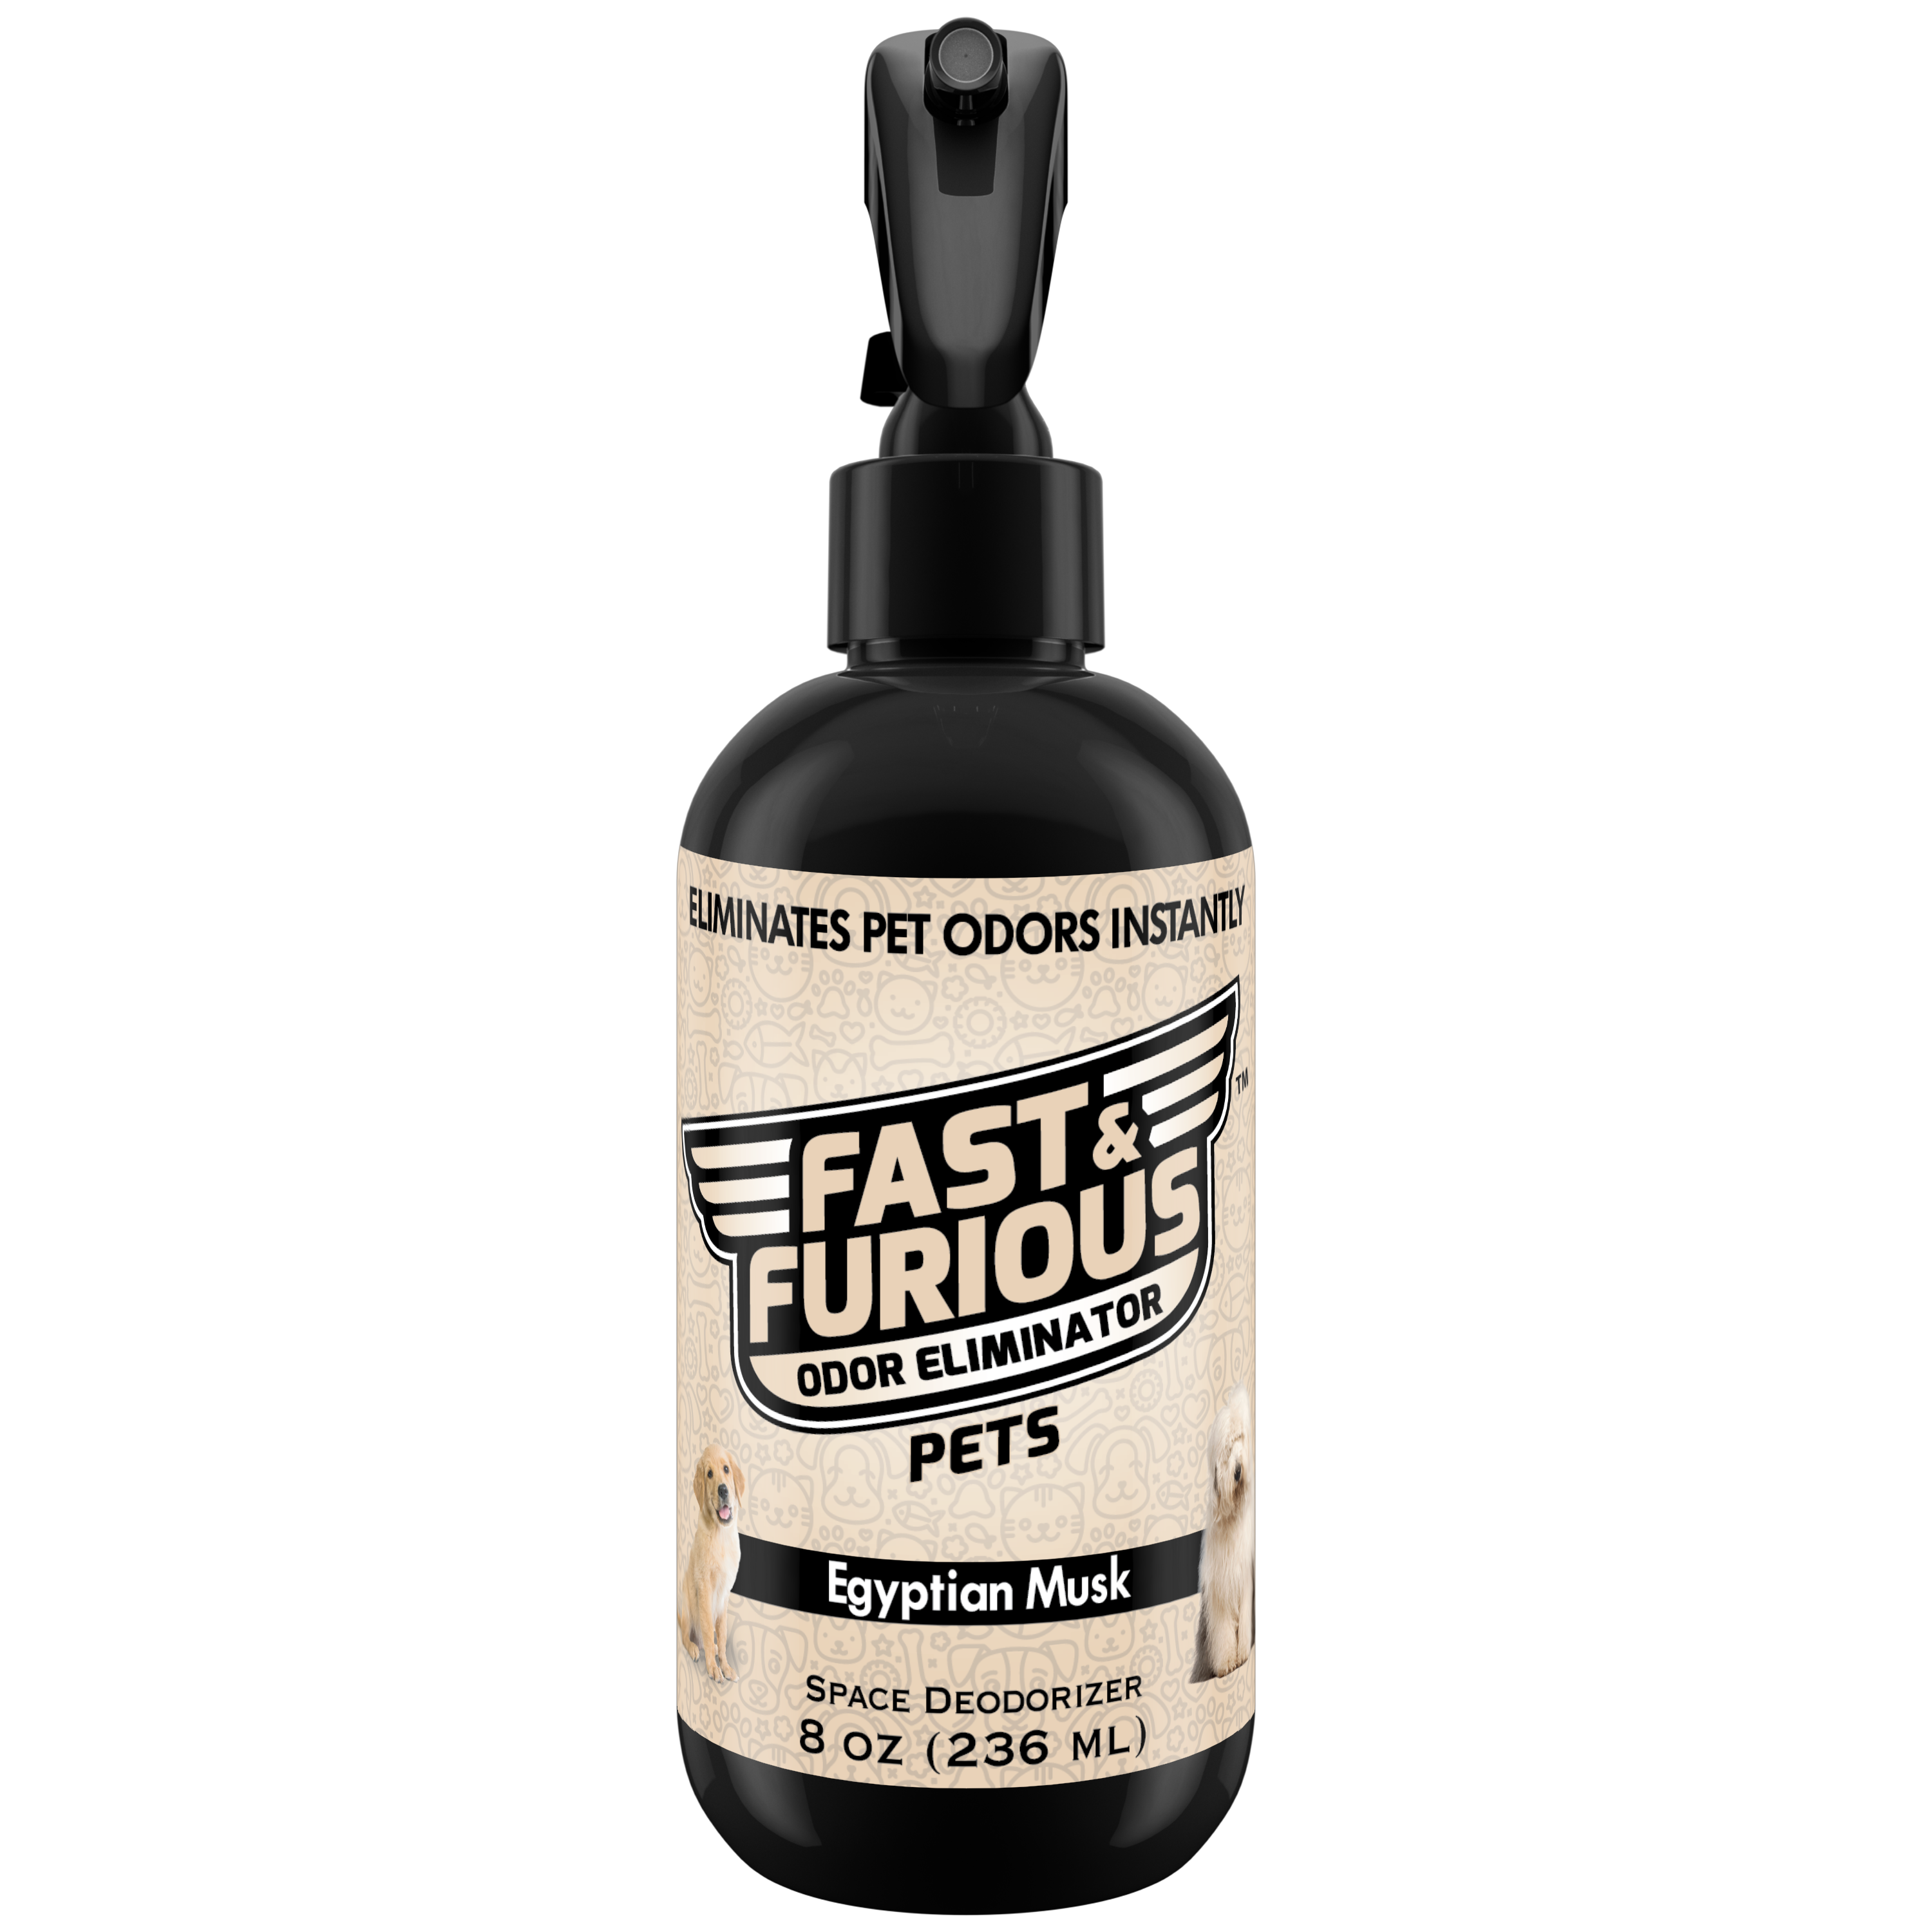 Fast and Furious Pets Odor Eliminator - Egyptian Musk Scent